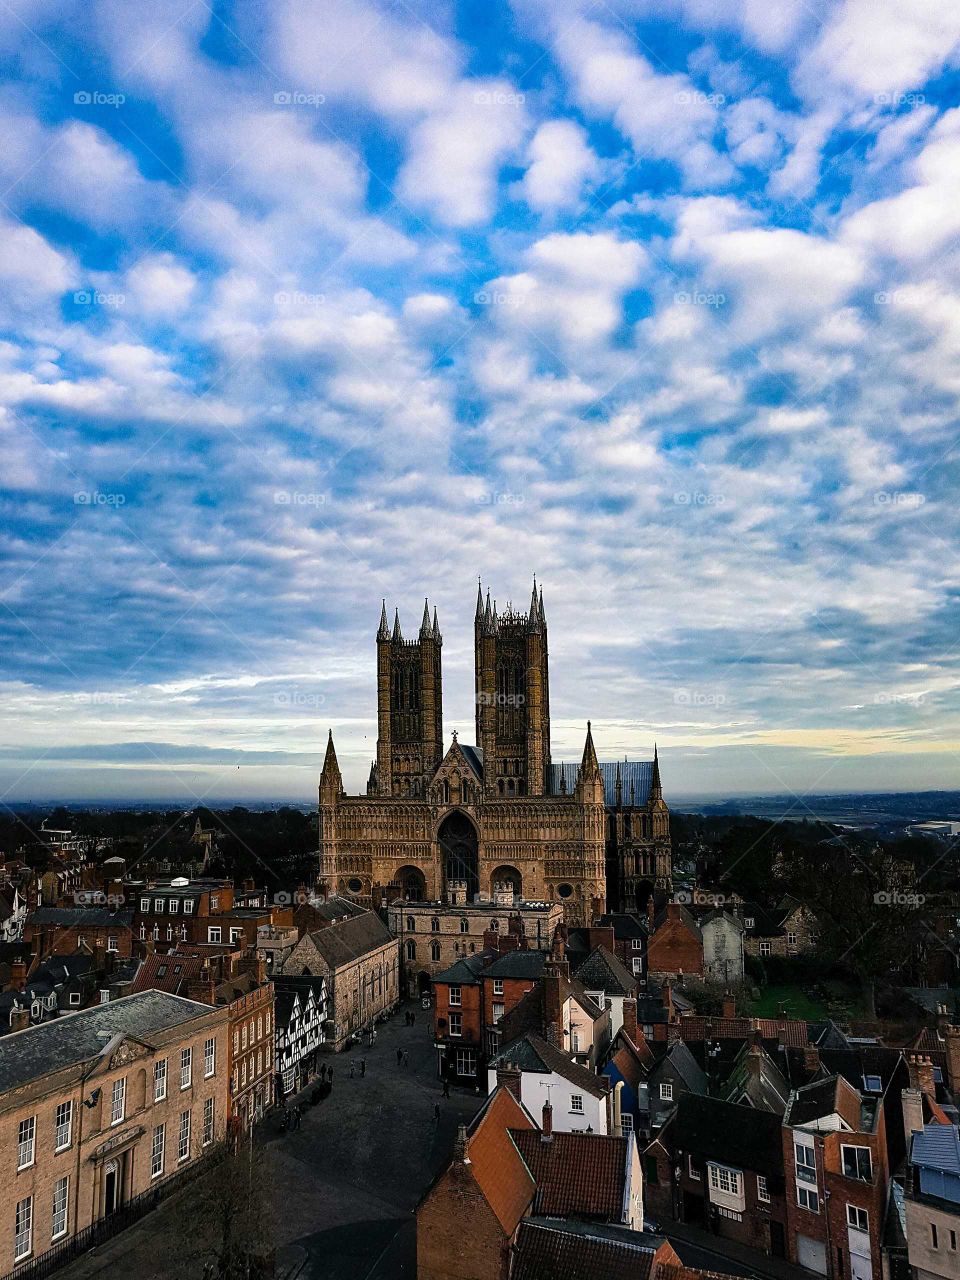 Lincoln cathedral December 2016